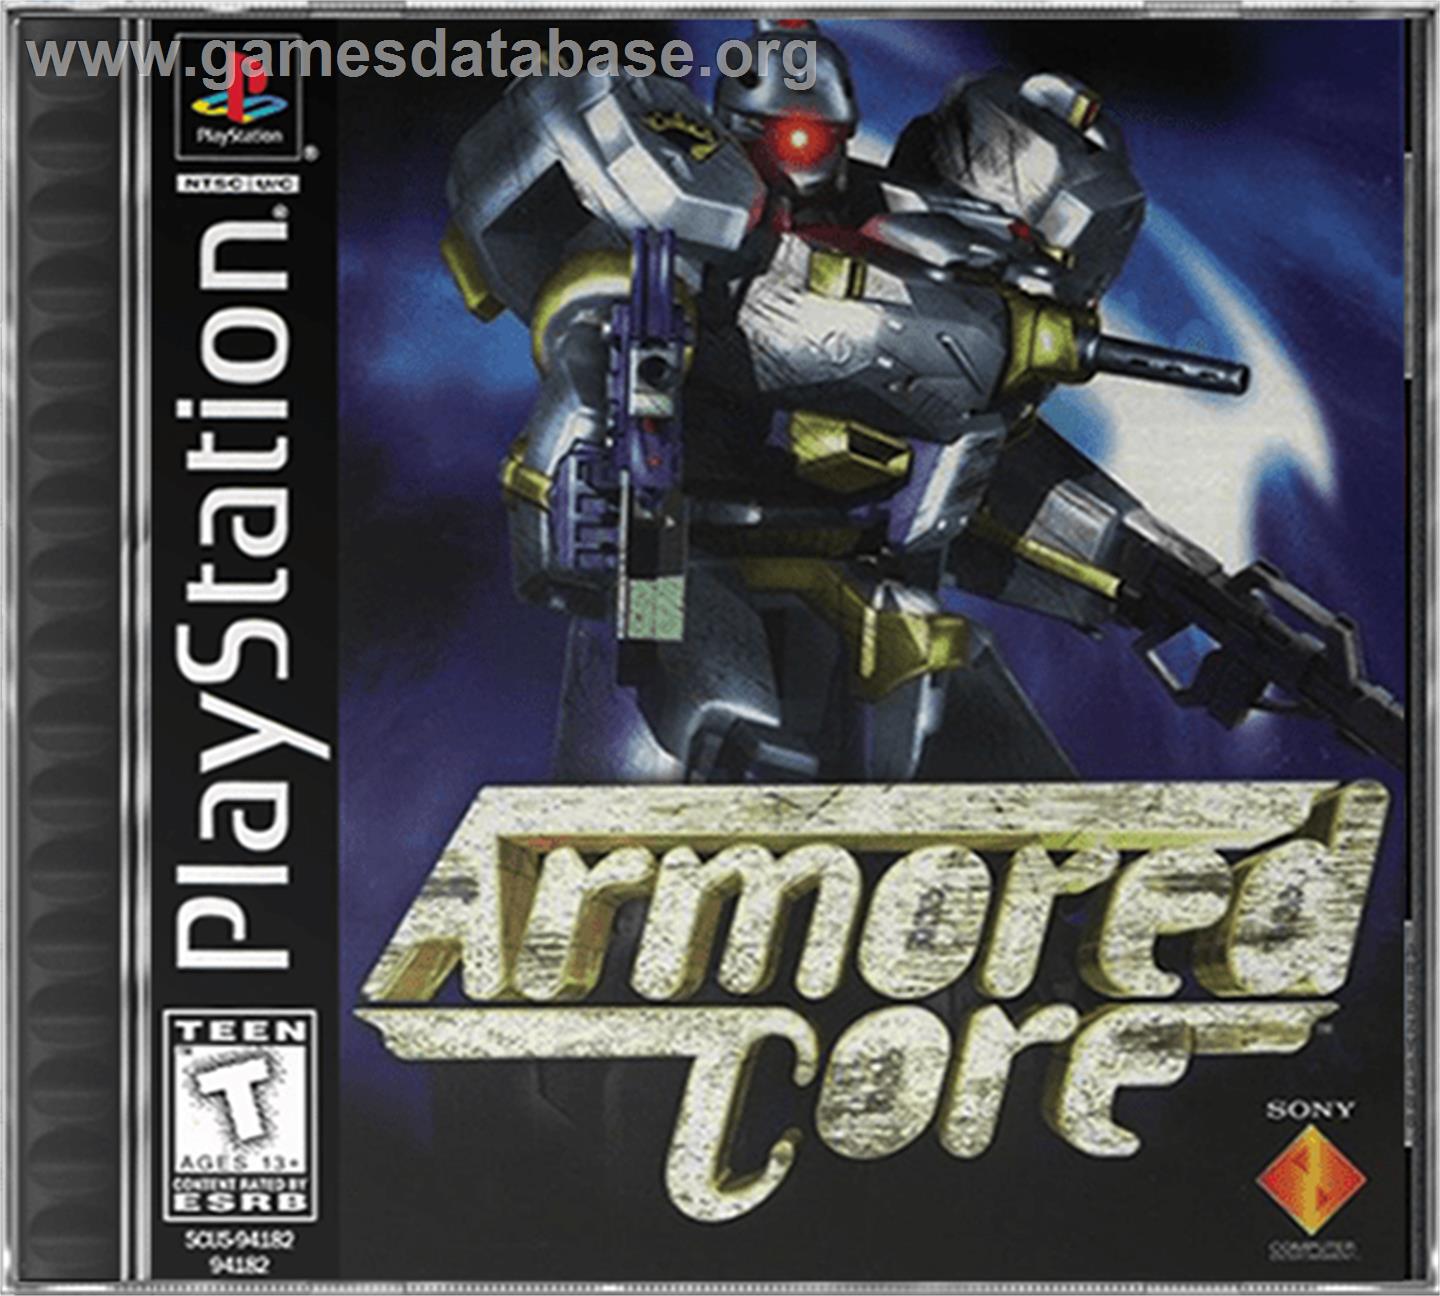 Armored Core: Master of Arena - Sony Playstation - Artwork - Box